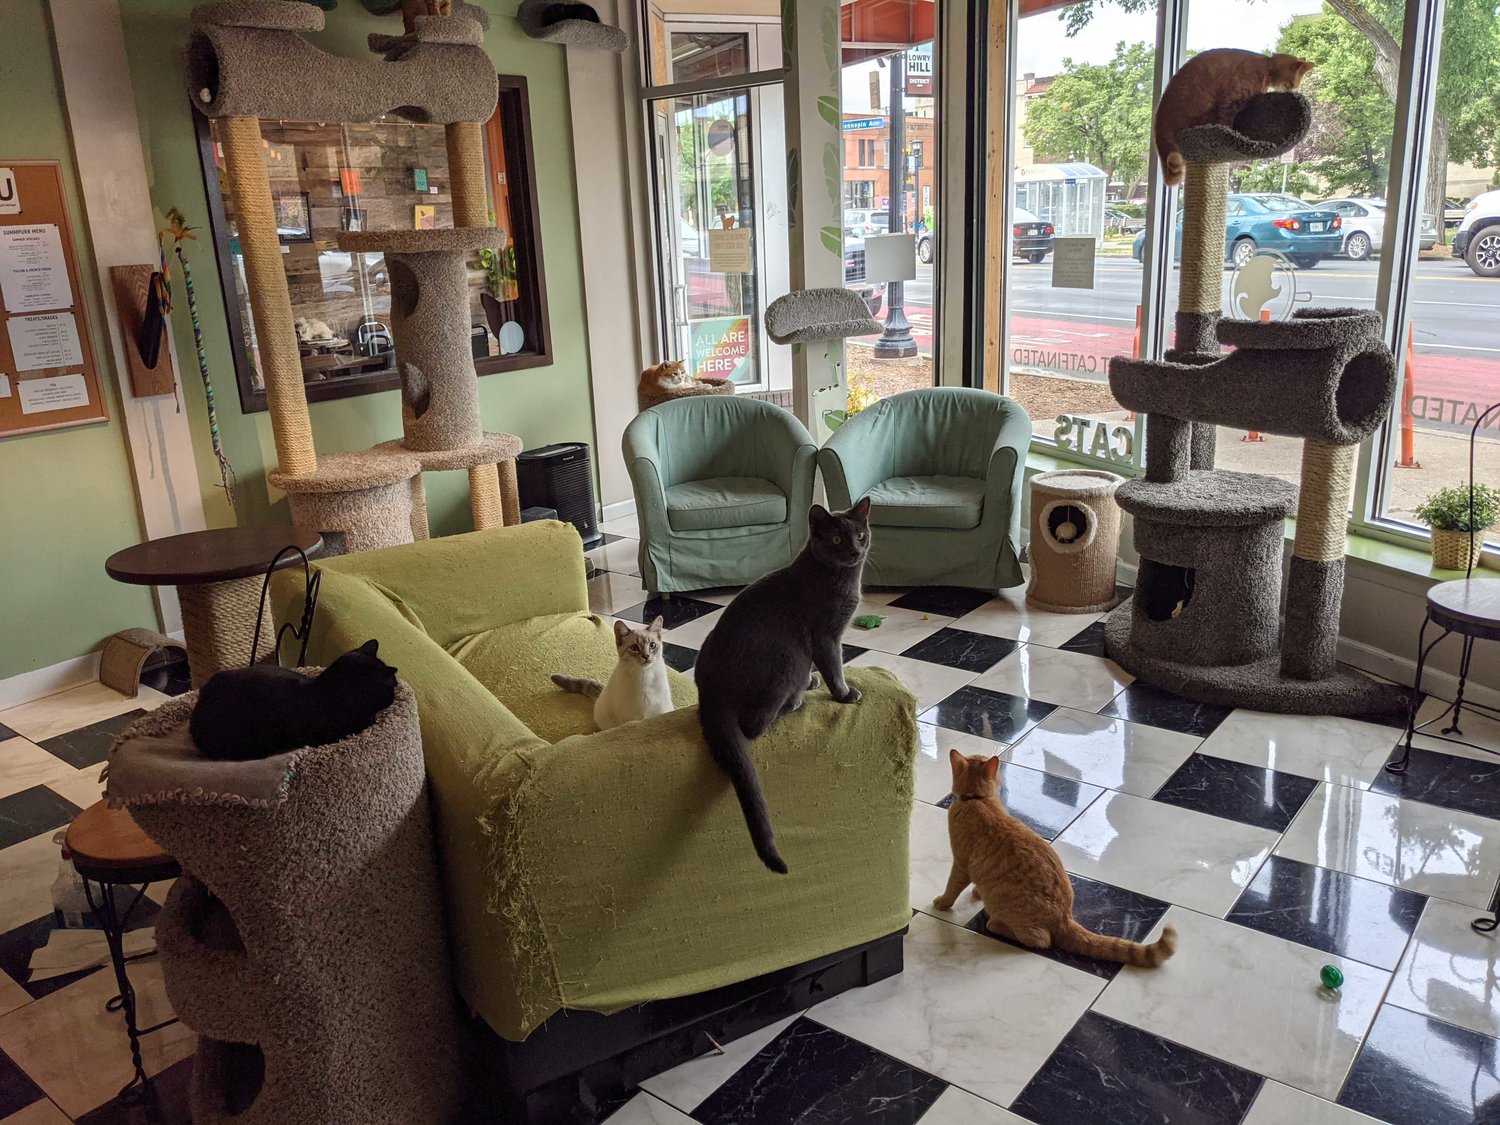 “The loss of parking both across the street, going south on Hennepin and in front of our business going north on Hennepin will be the end of our business on Hennepin," remarked Jessica Burge of The Cafe Meow (2323 Hennepin Ave. S.).